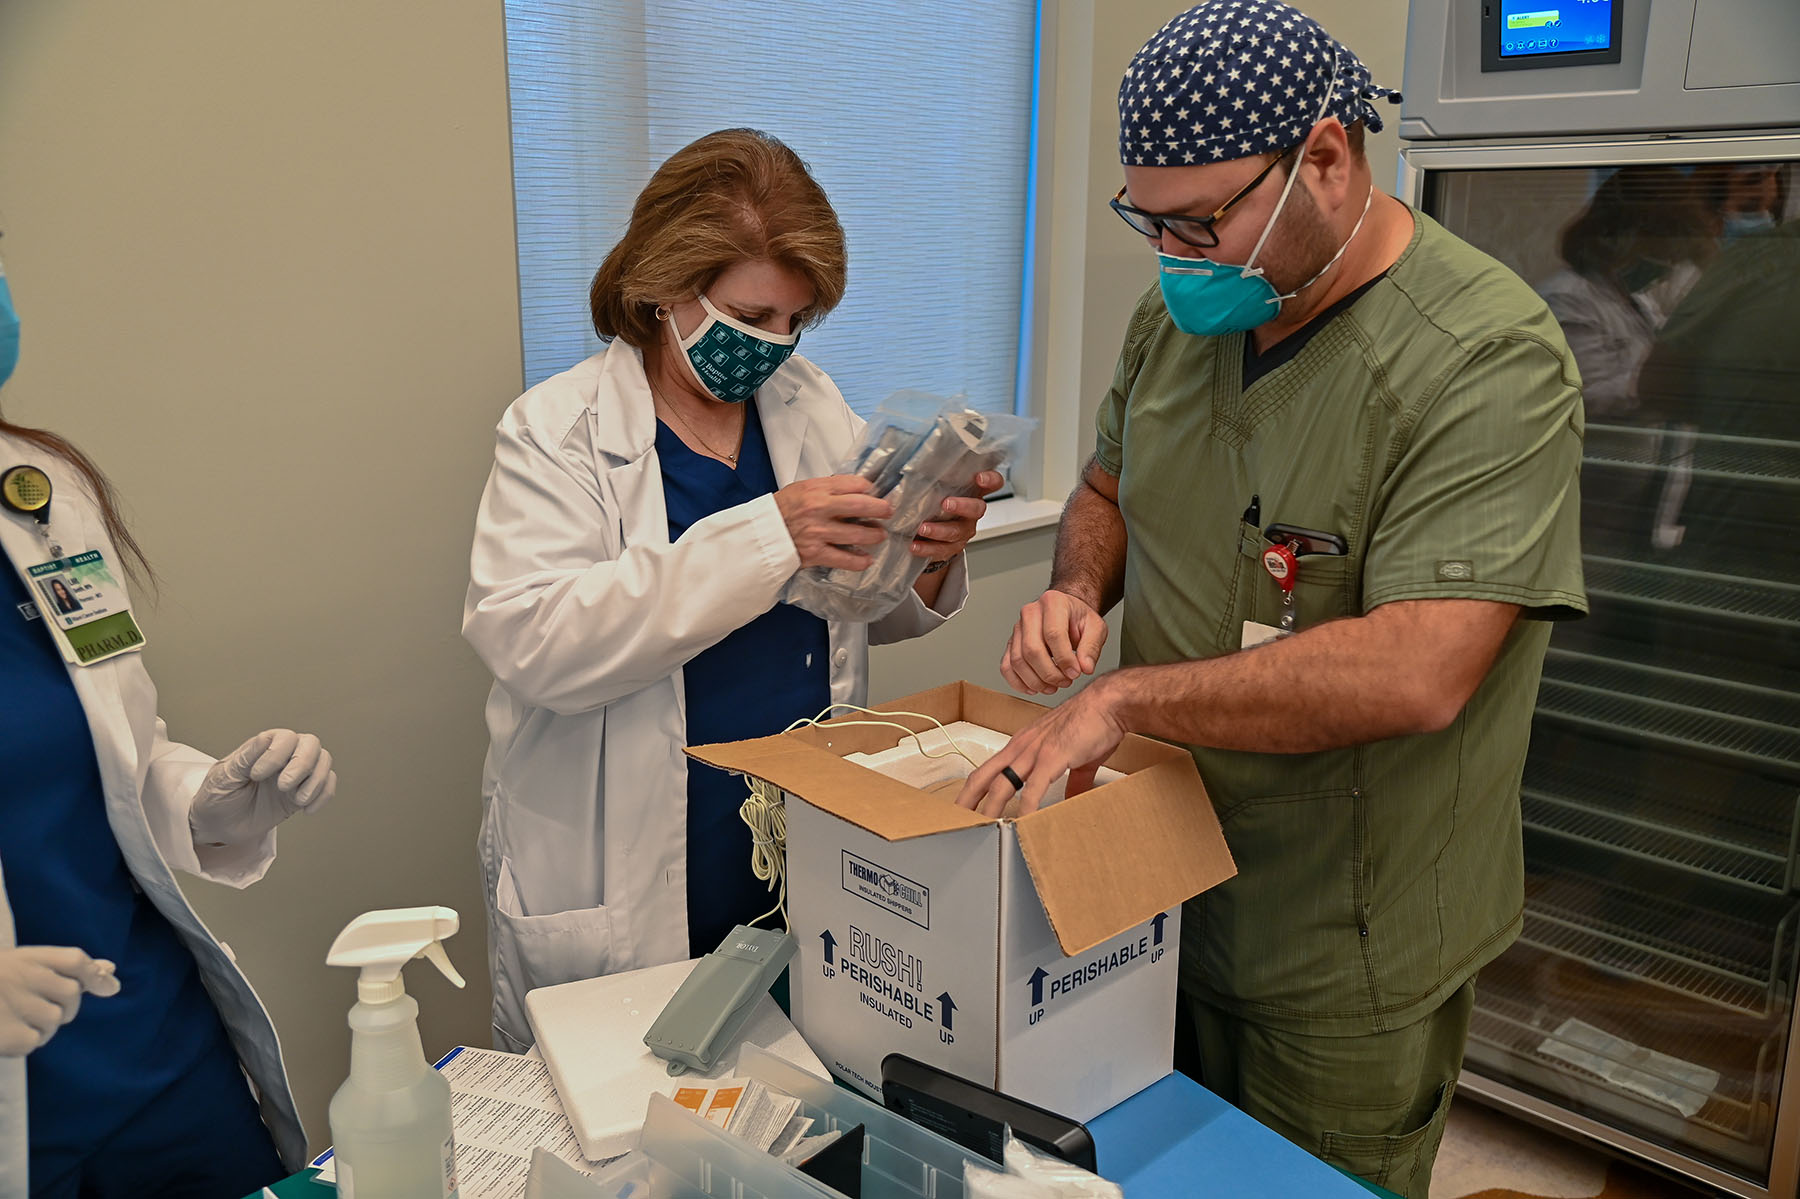 Madeline Camejo, Chief Pharmacy Officer at Baptist Health, unpacks first COVID-19 vaccines